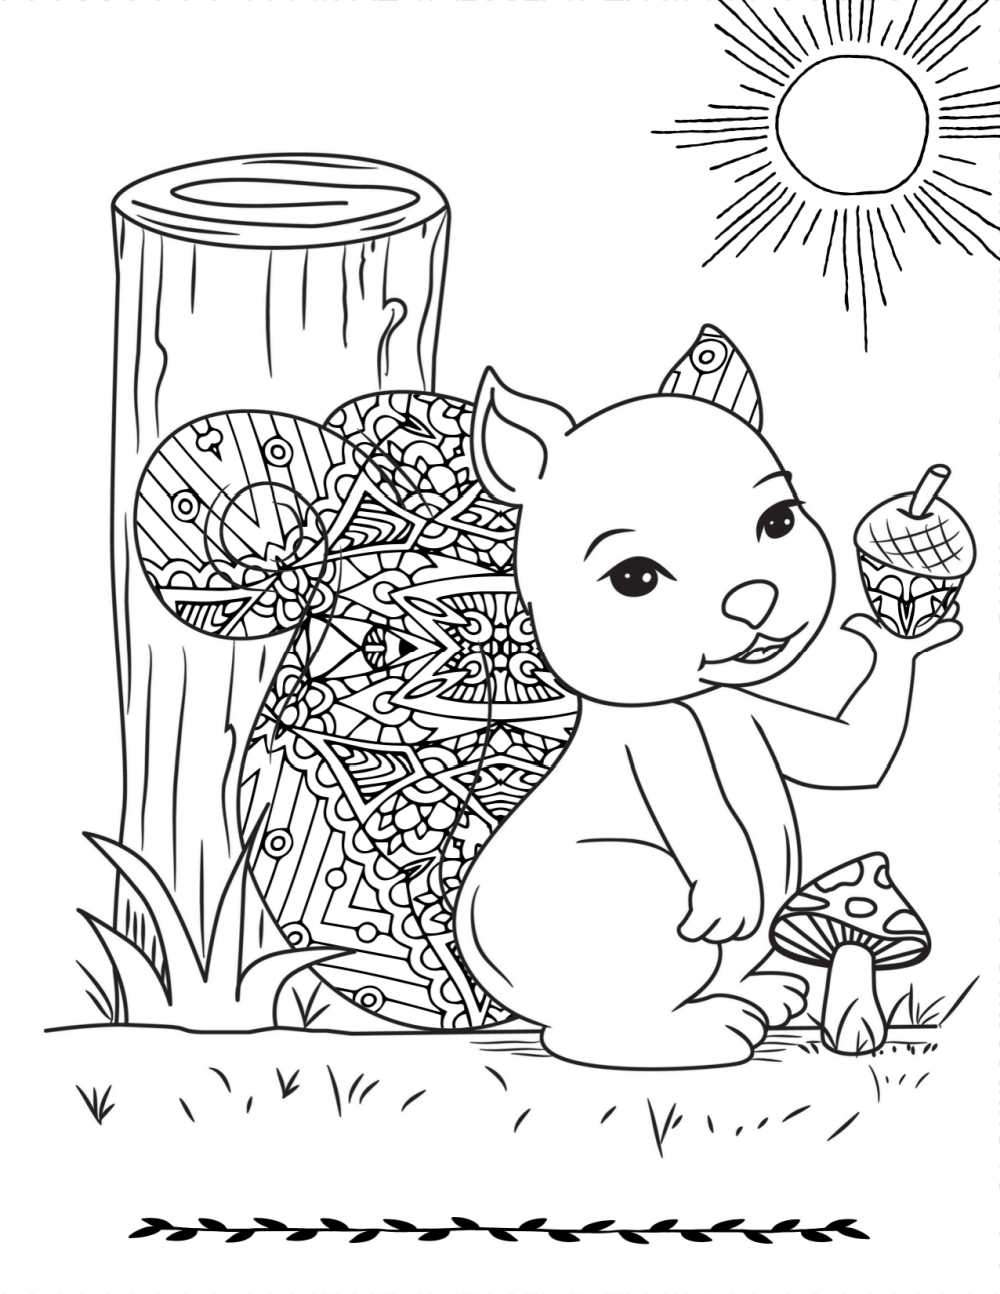 You or your child can color this cute squirrel with mushroom coloring page, when you download the pdf for free. 